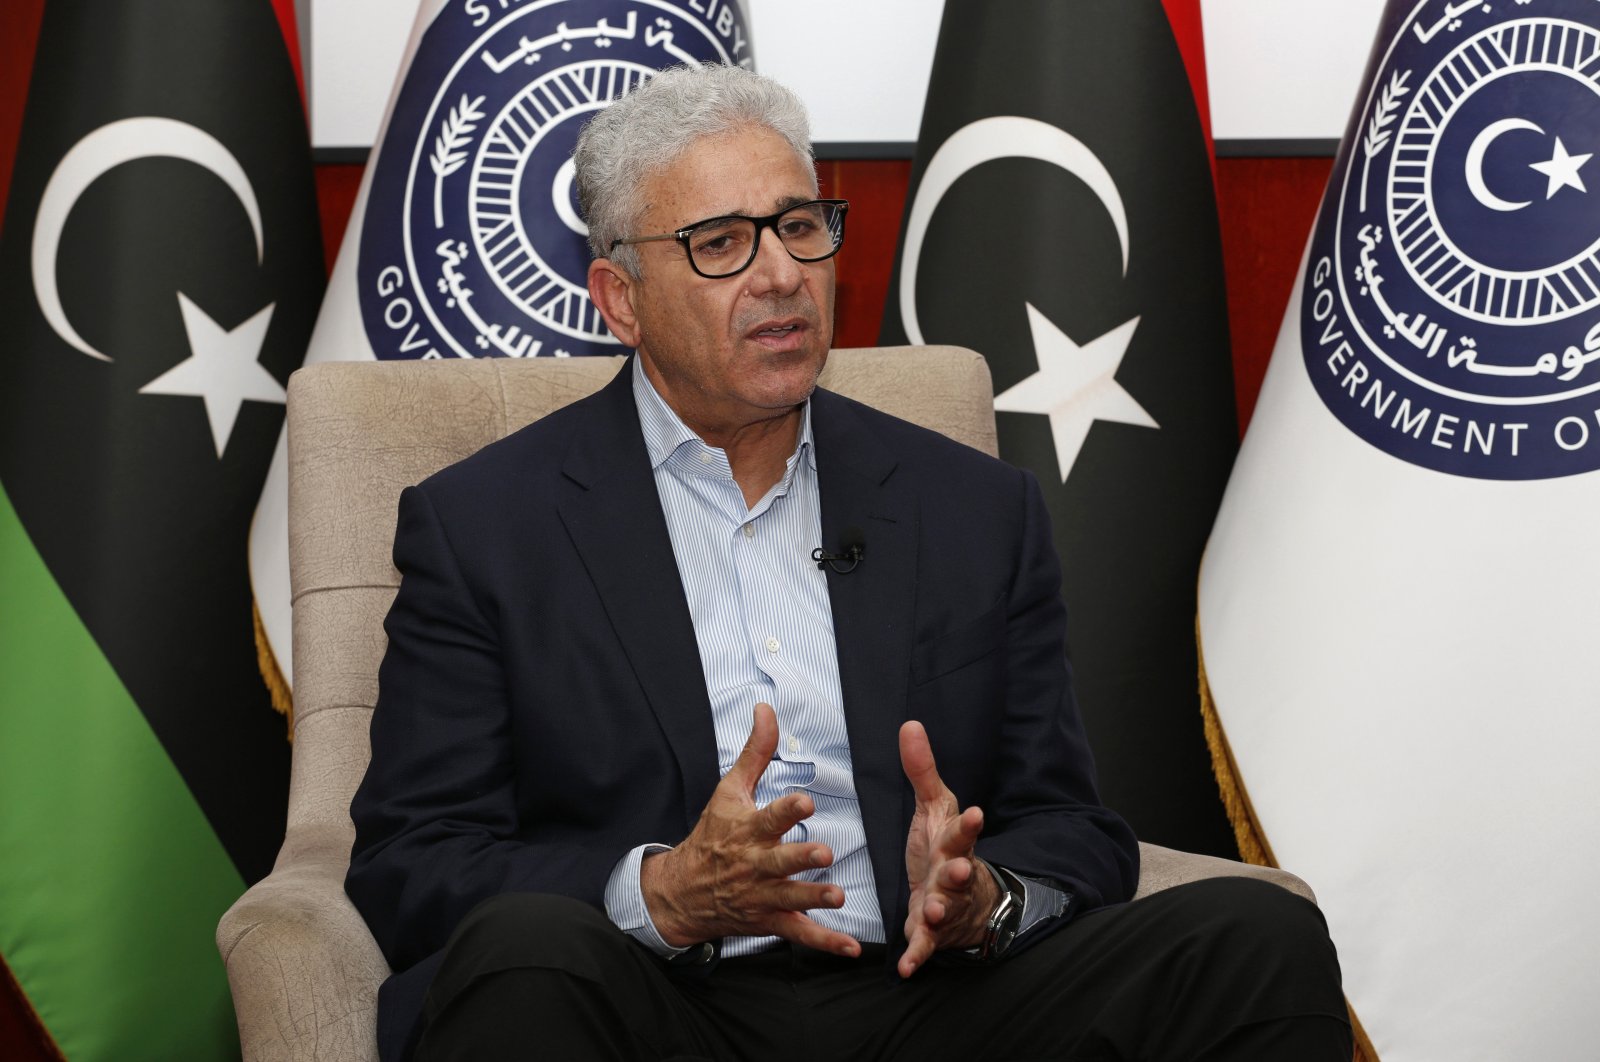 Fathi Bashagha, one of Libya’s rival prime ministers, gives an interview to The Associated Press, in Sirte, Libya, May 25, 2022. (AP Photo)